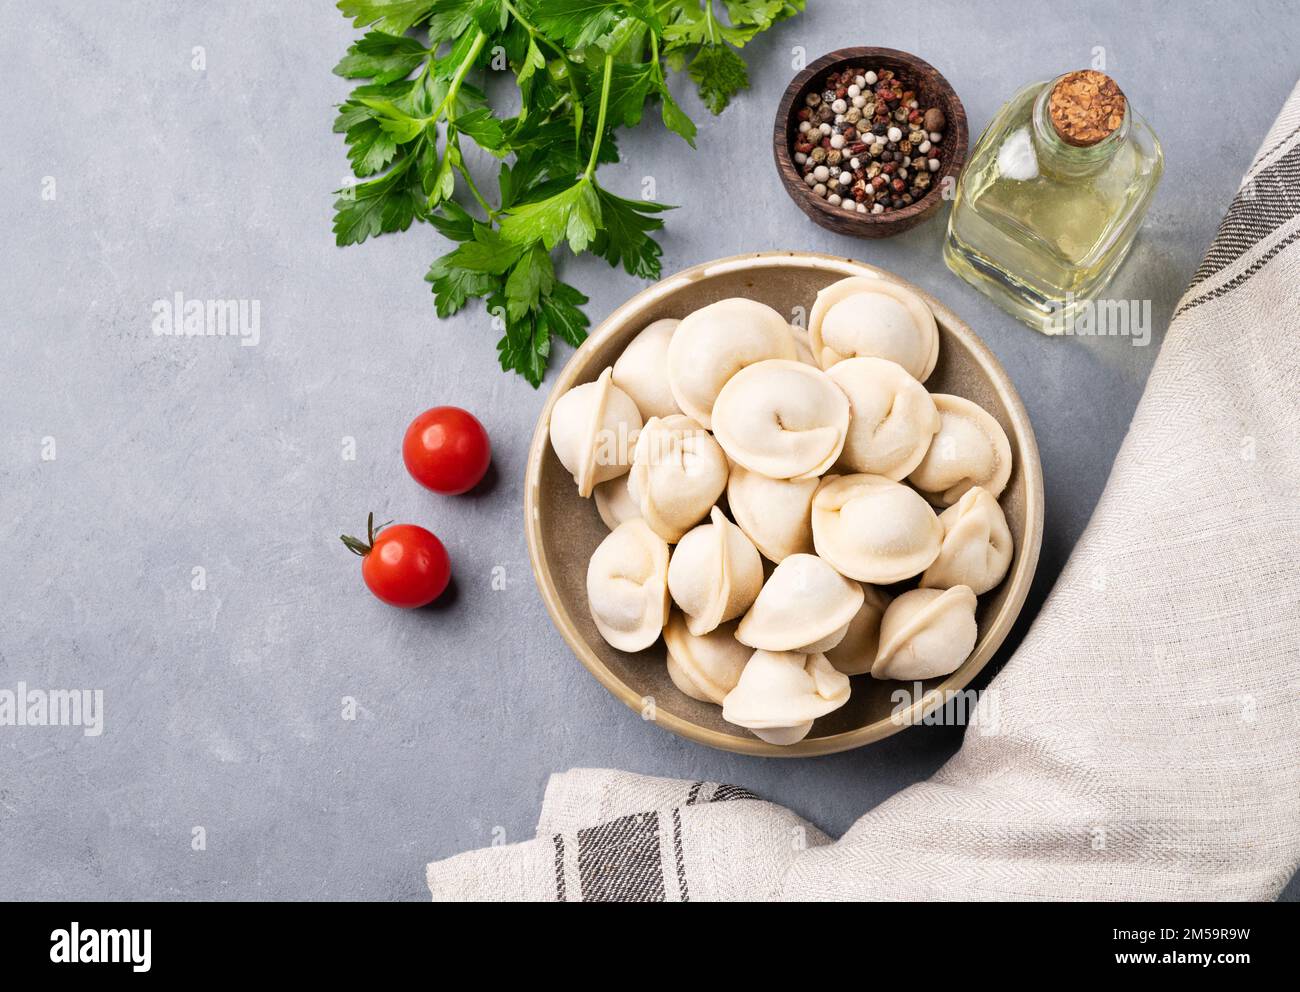 Dumplings with meat. The Russian traditional dish is Siberian pelmeni. Served with fresh herbs, butter and vegetables. Top view and copy space. Stock Photo